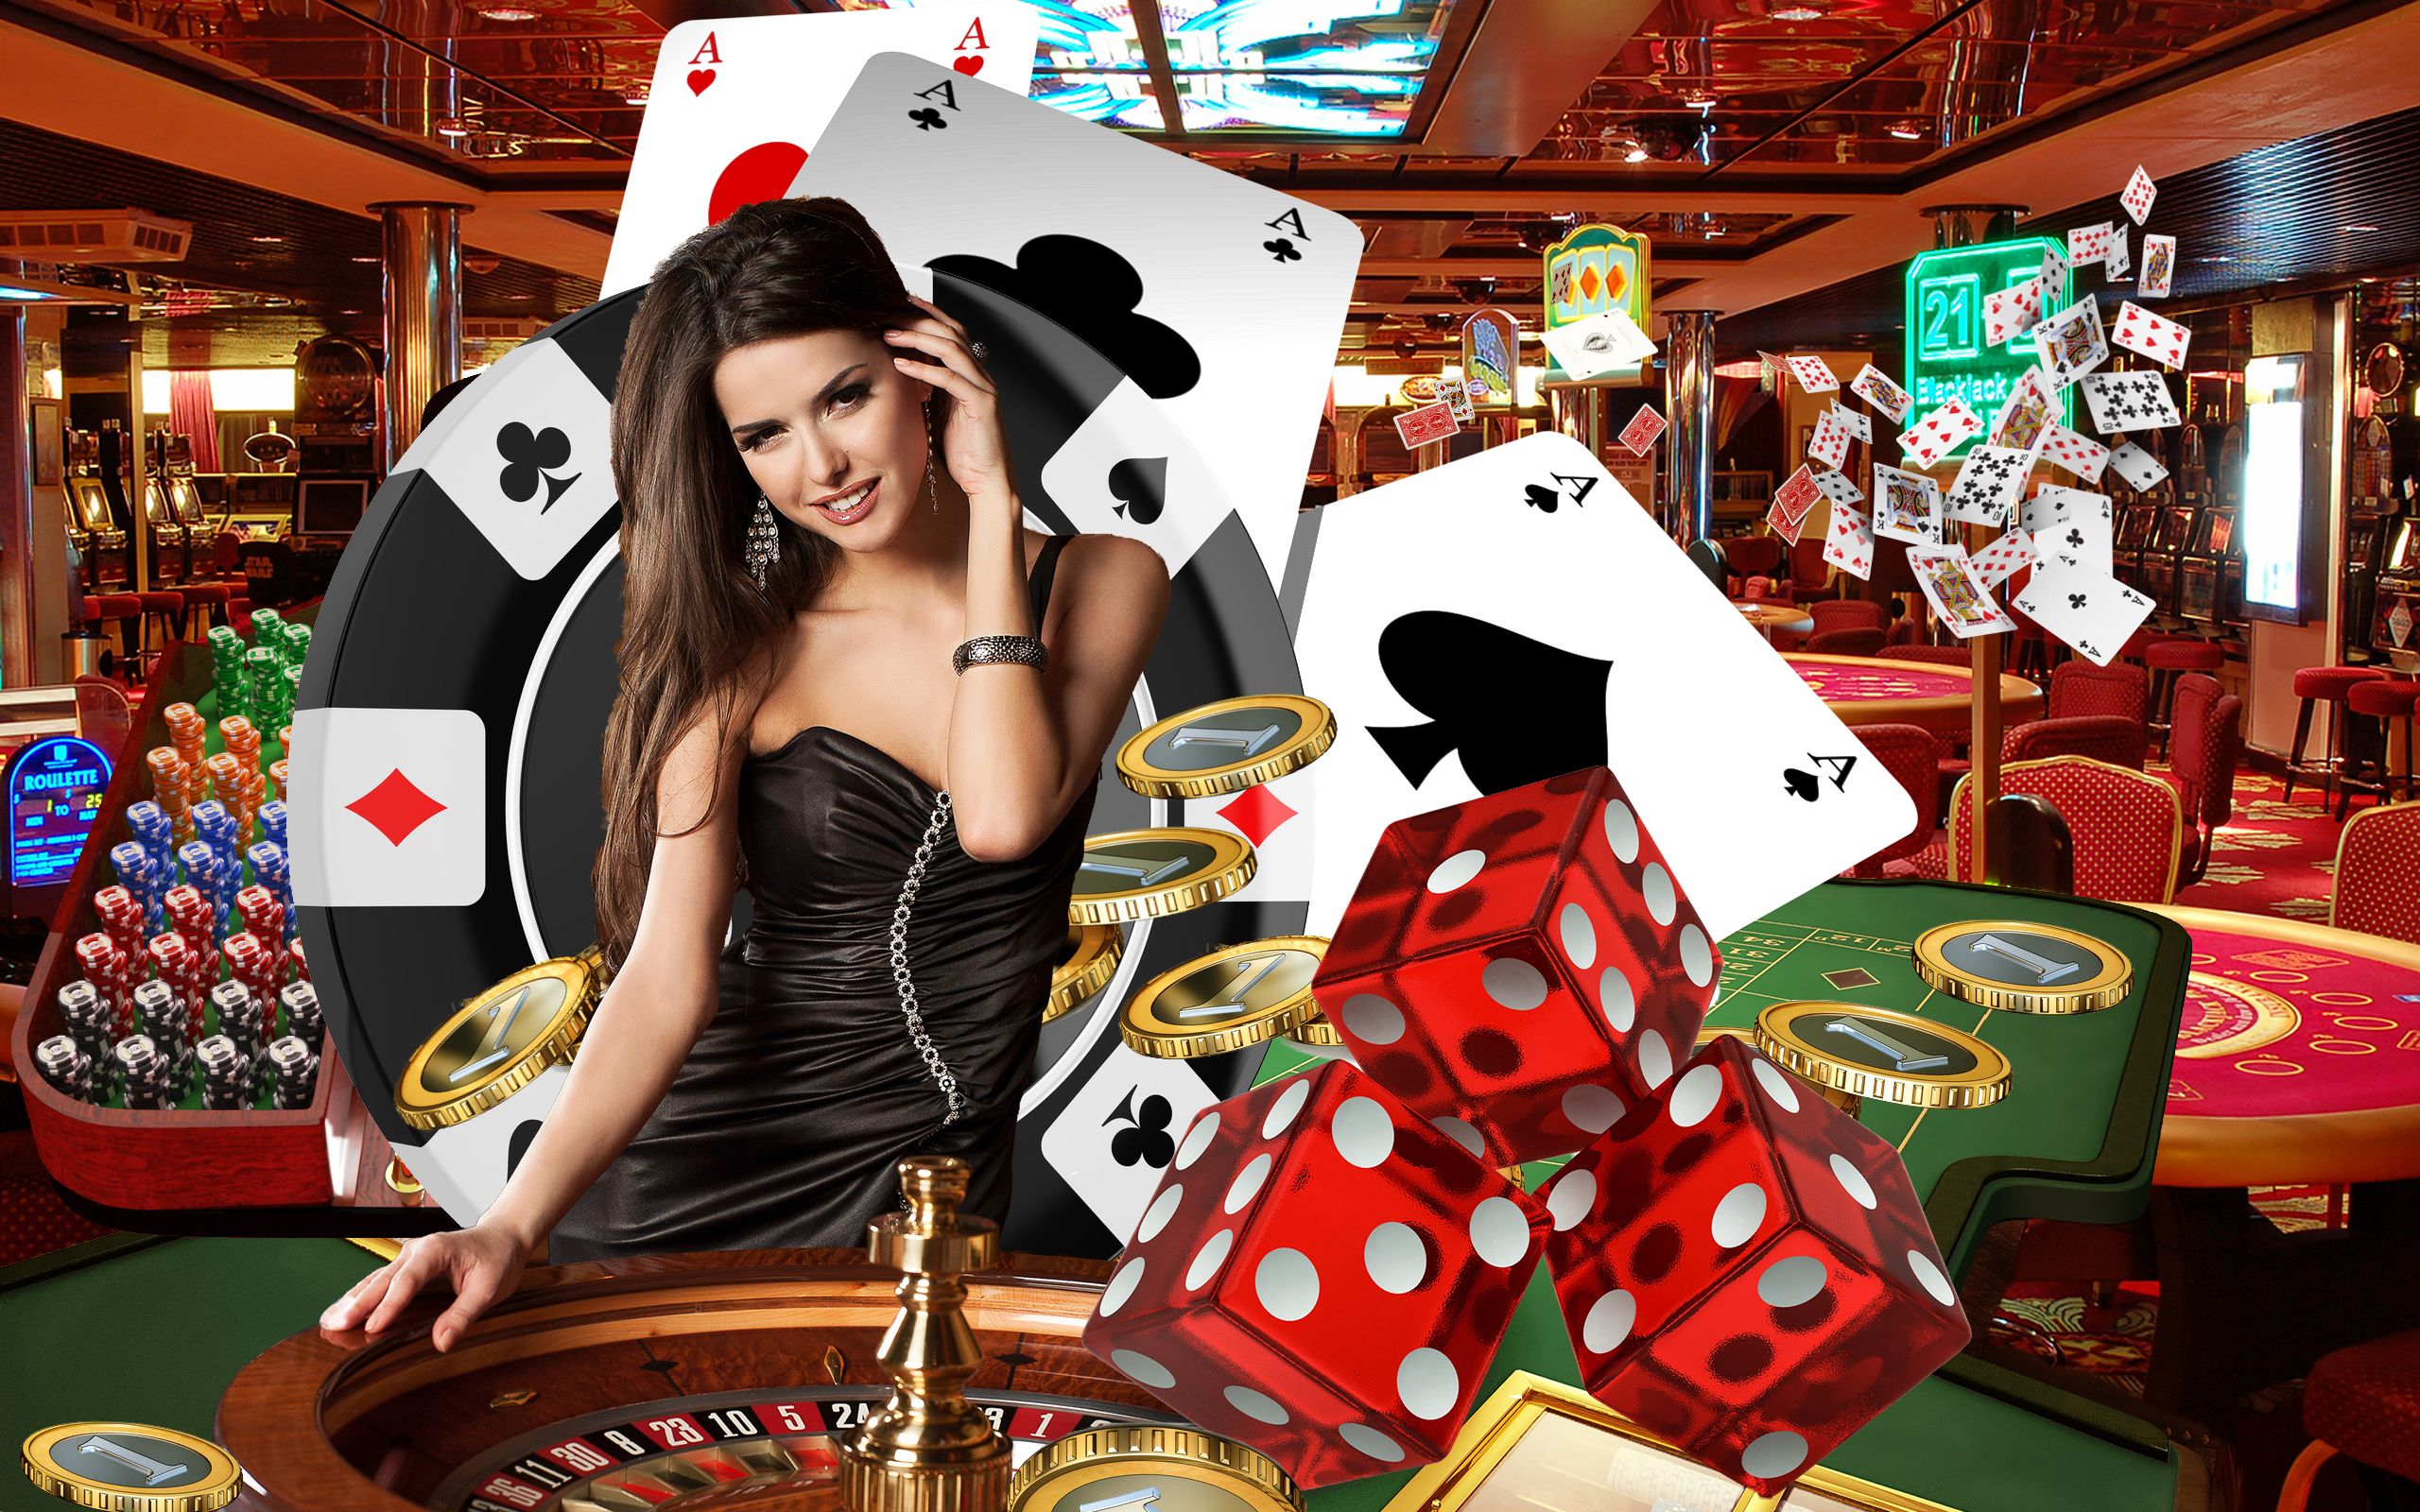 Some specialties and features concerning online casinos in comparison to terrain